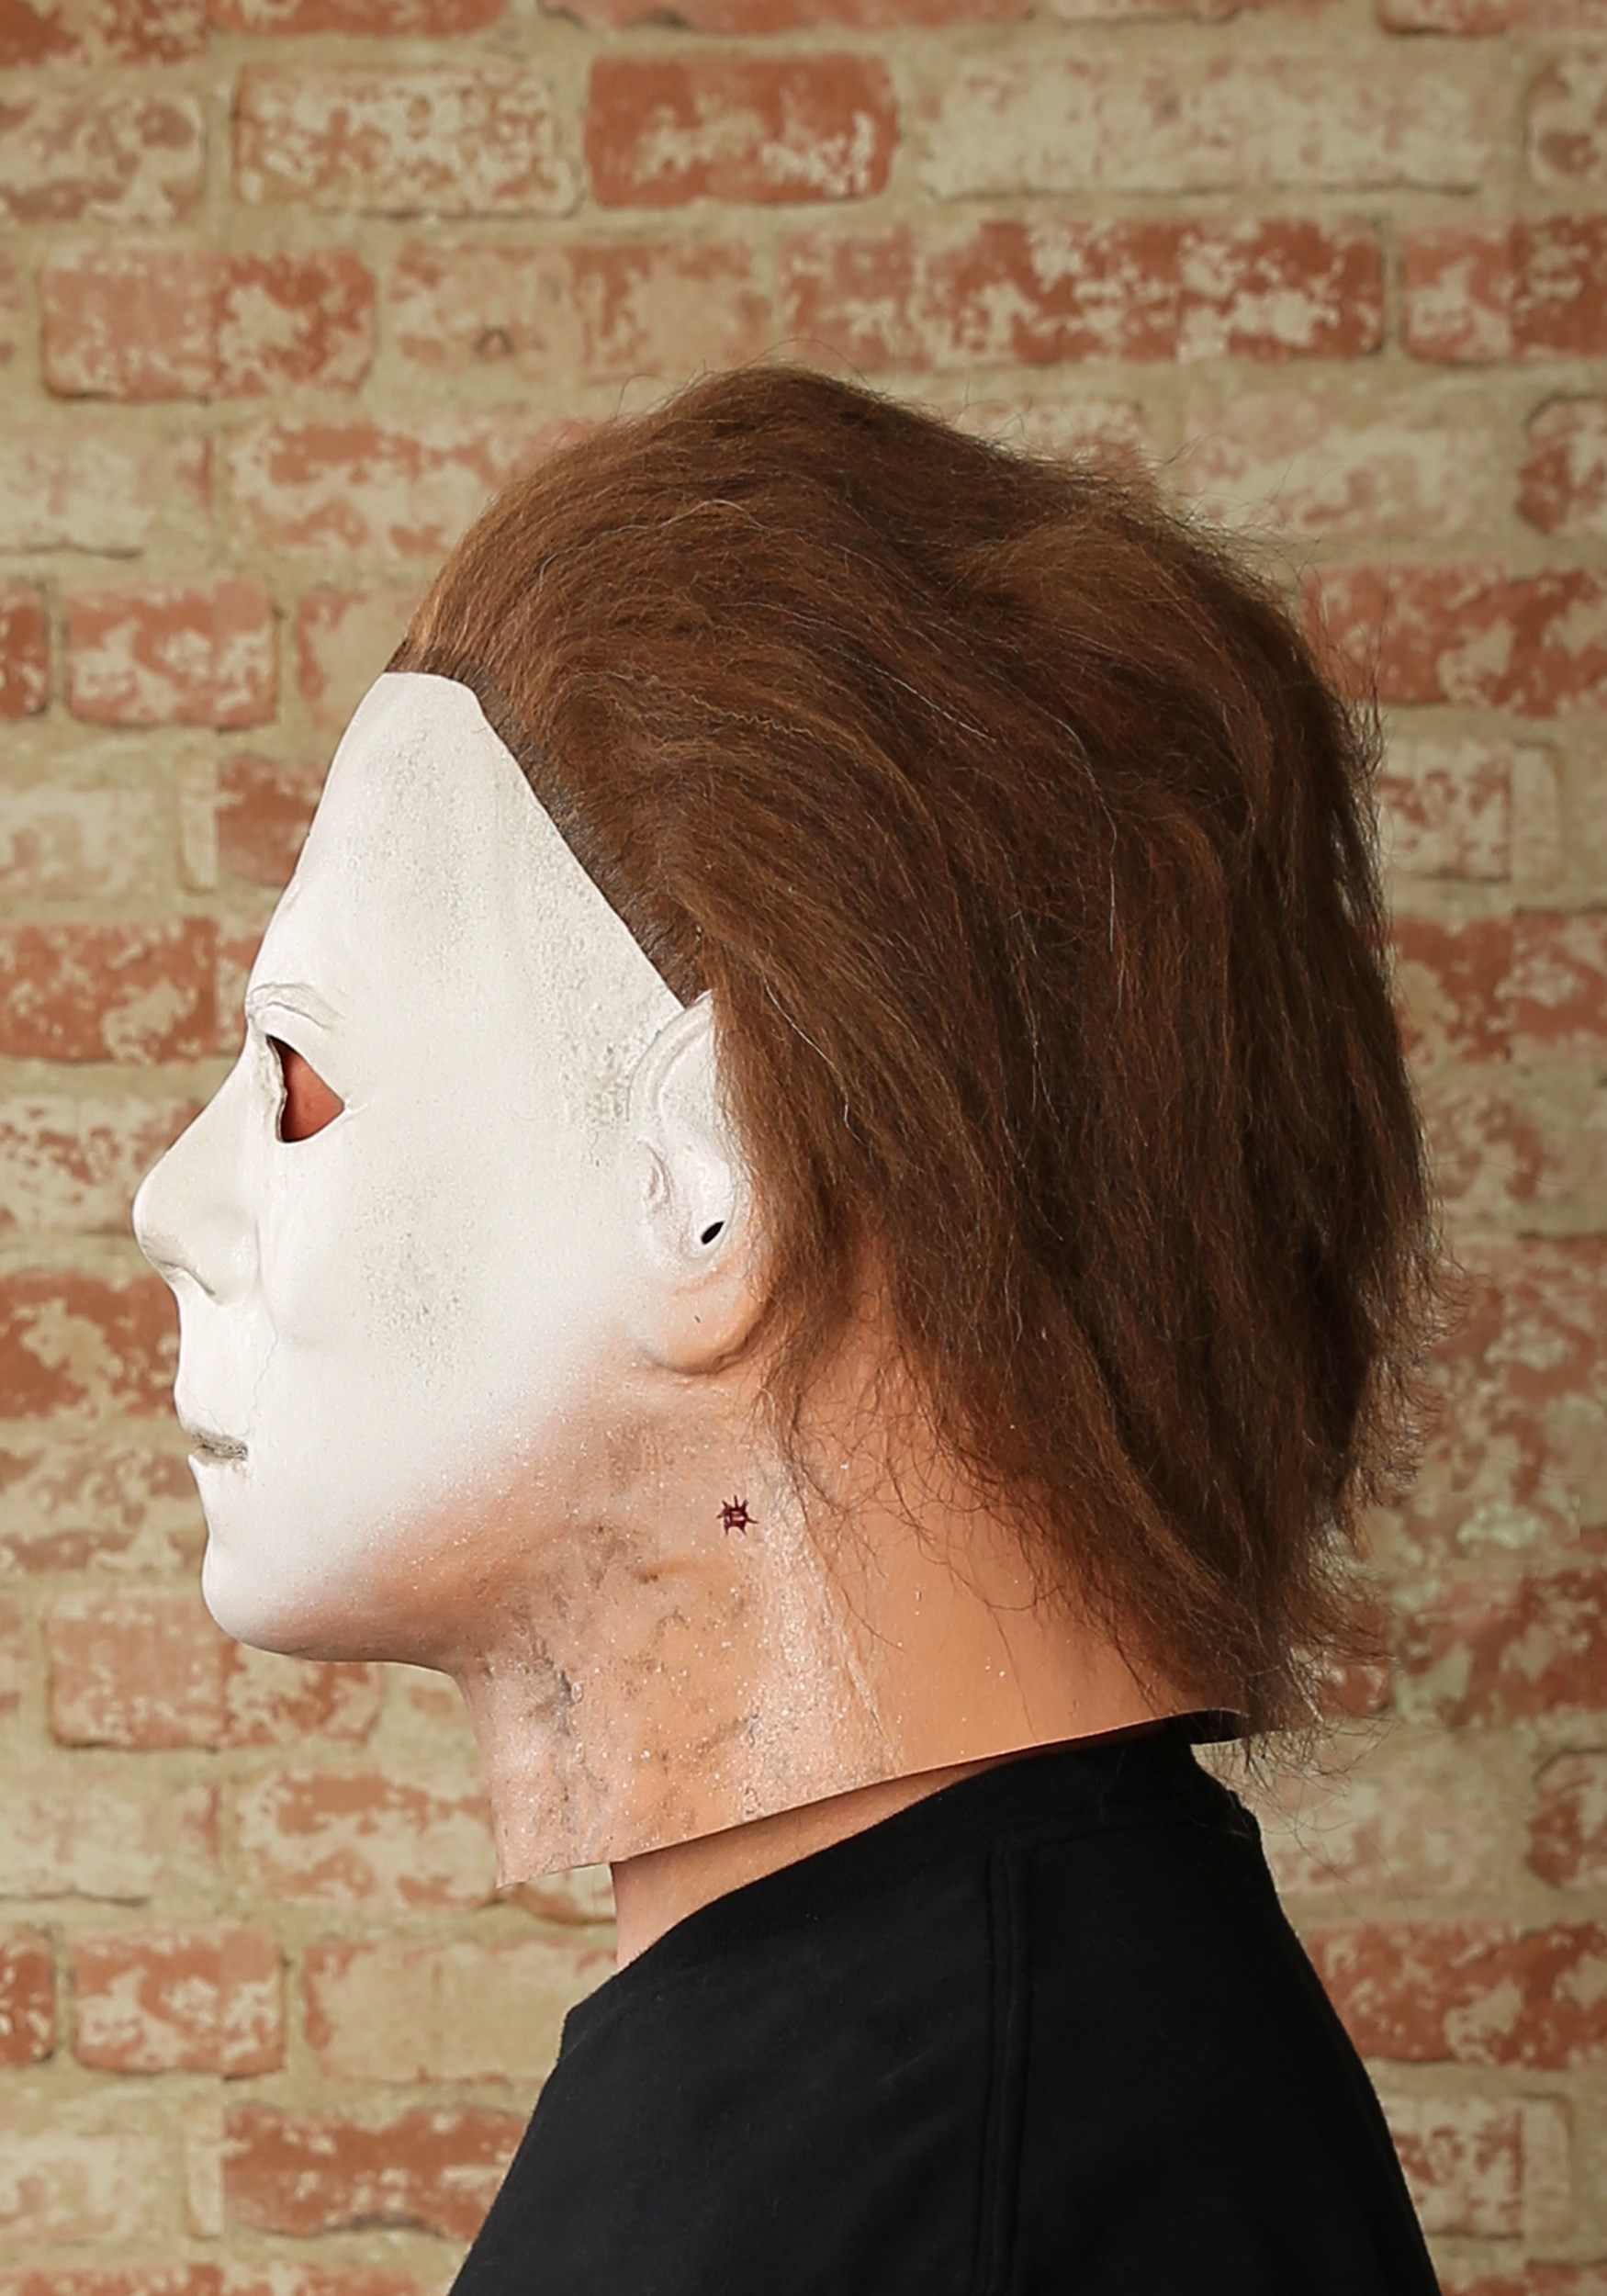 Michael Myers from Halloween 2 Dog Costume